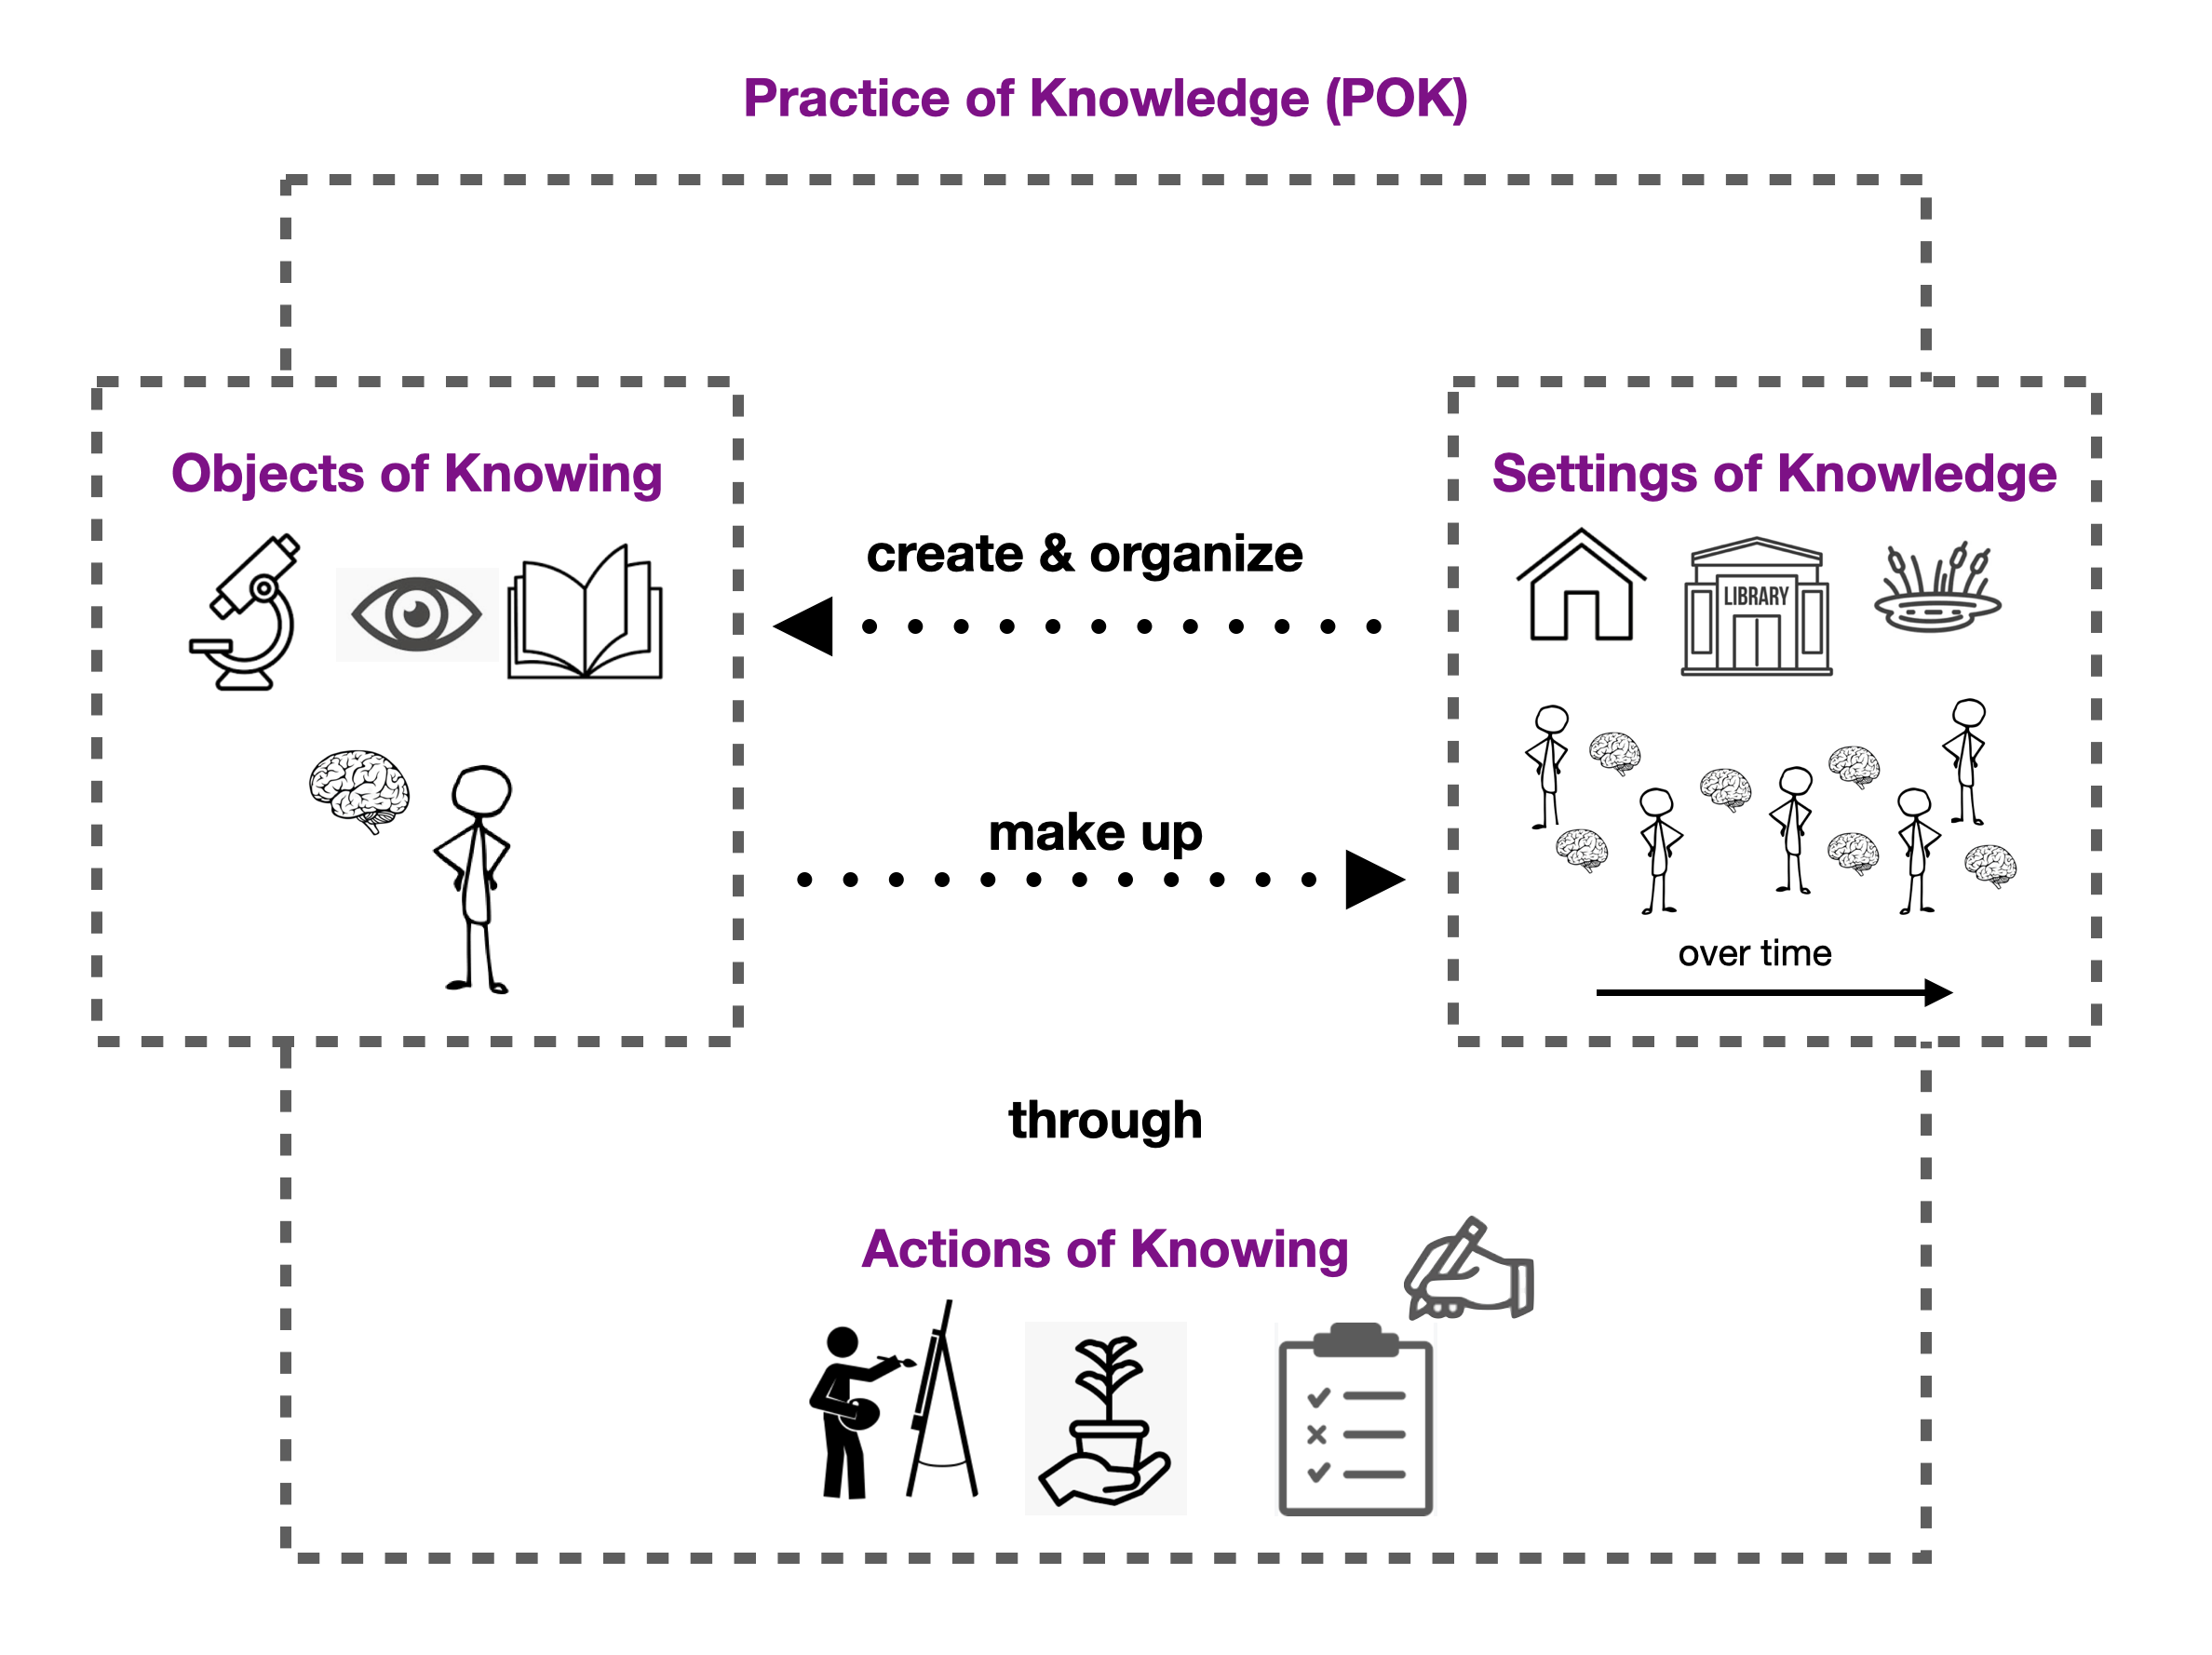 Constructing Knowledge